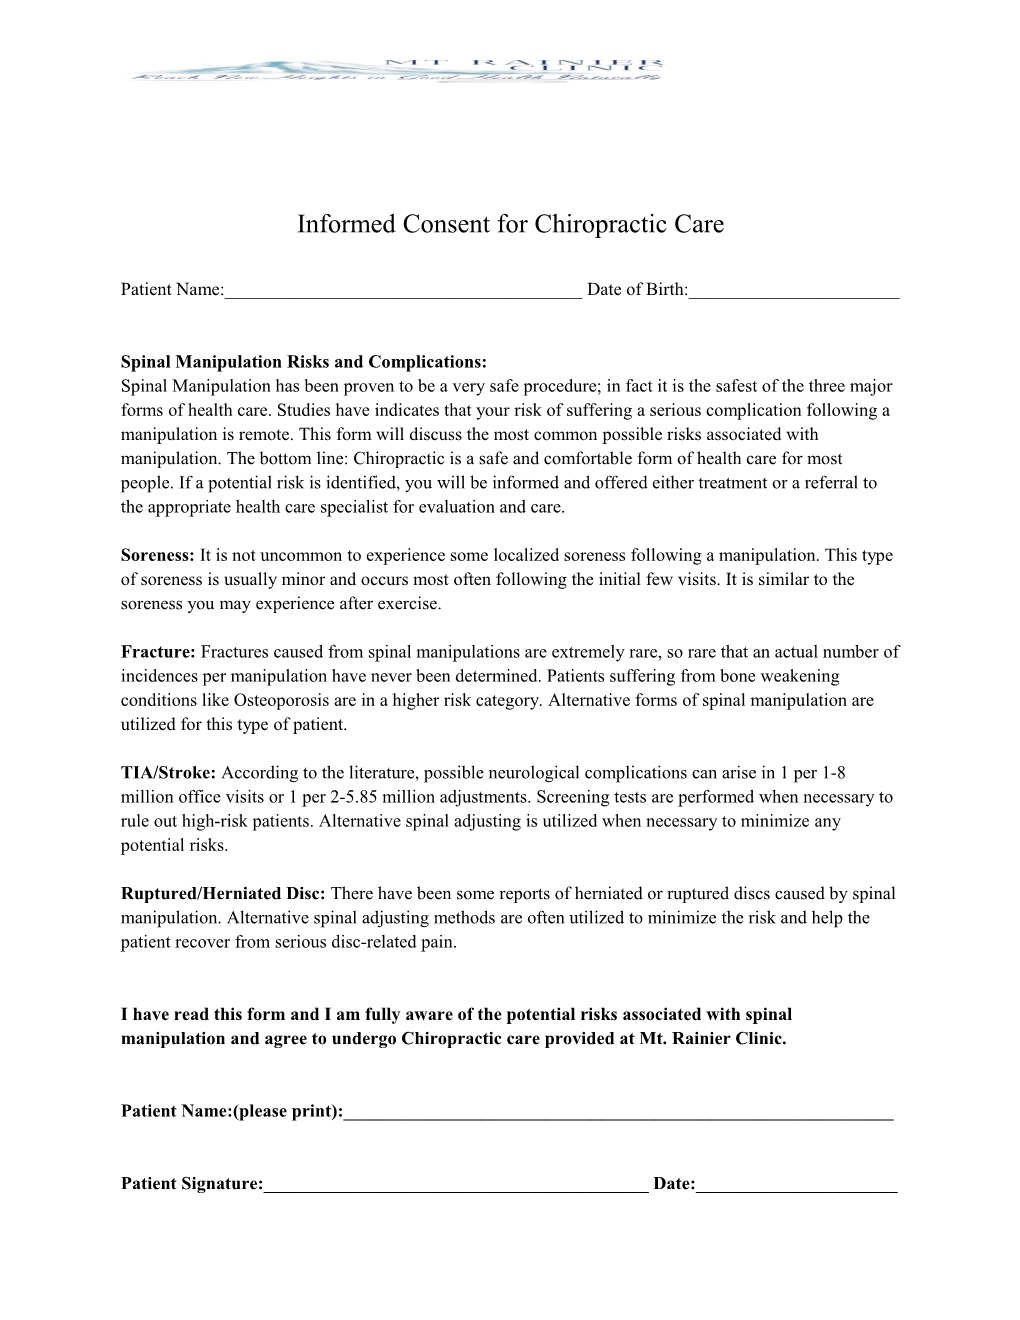 Informed Consent for Chiropractic Care